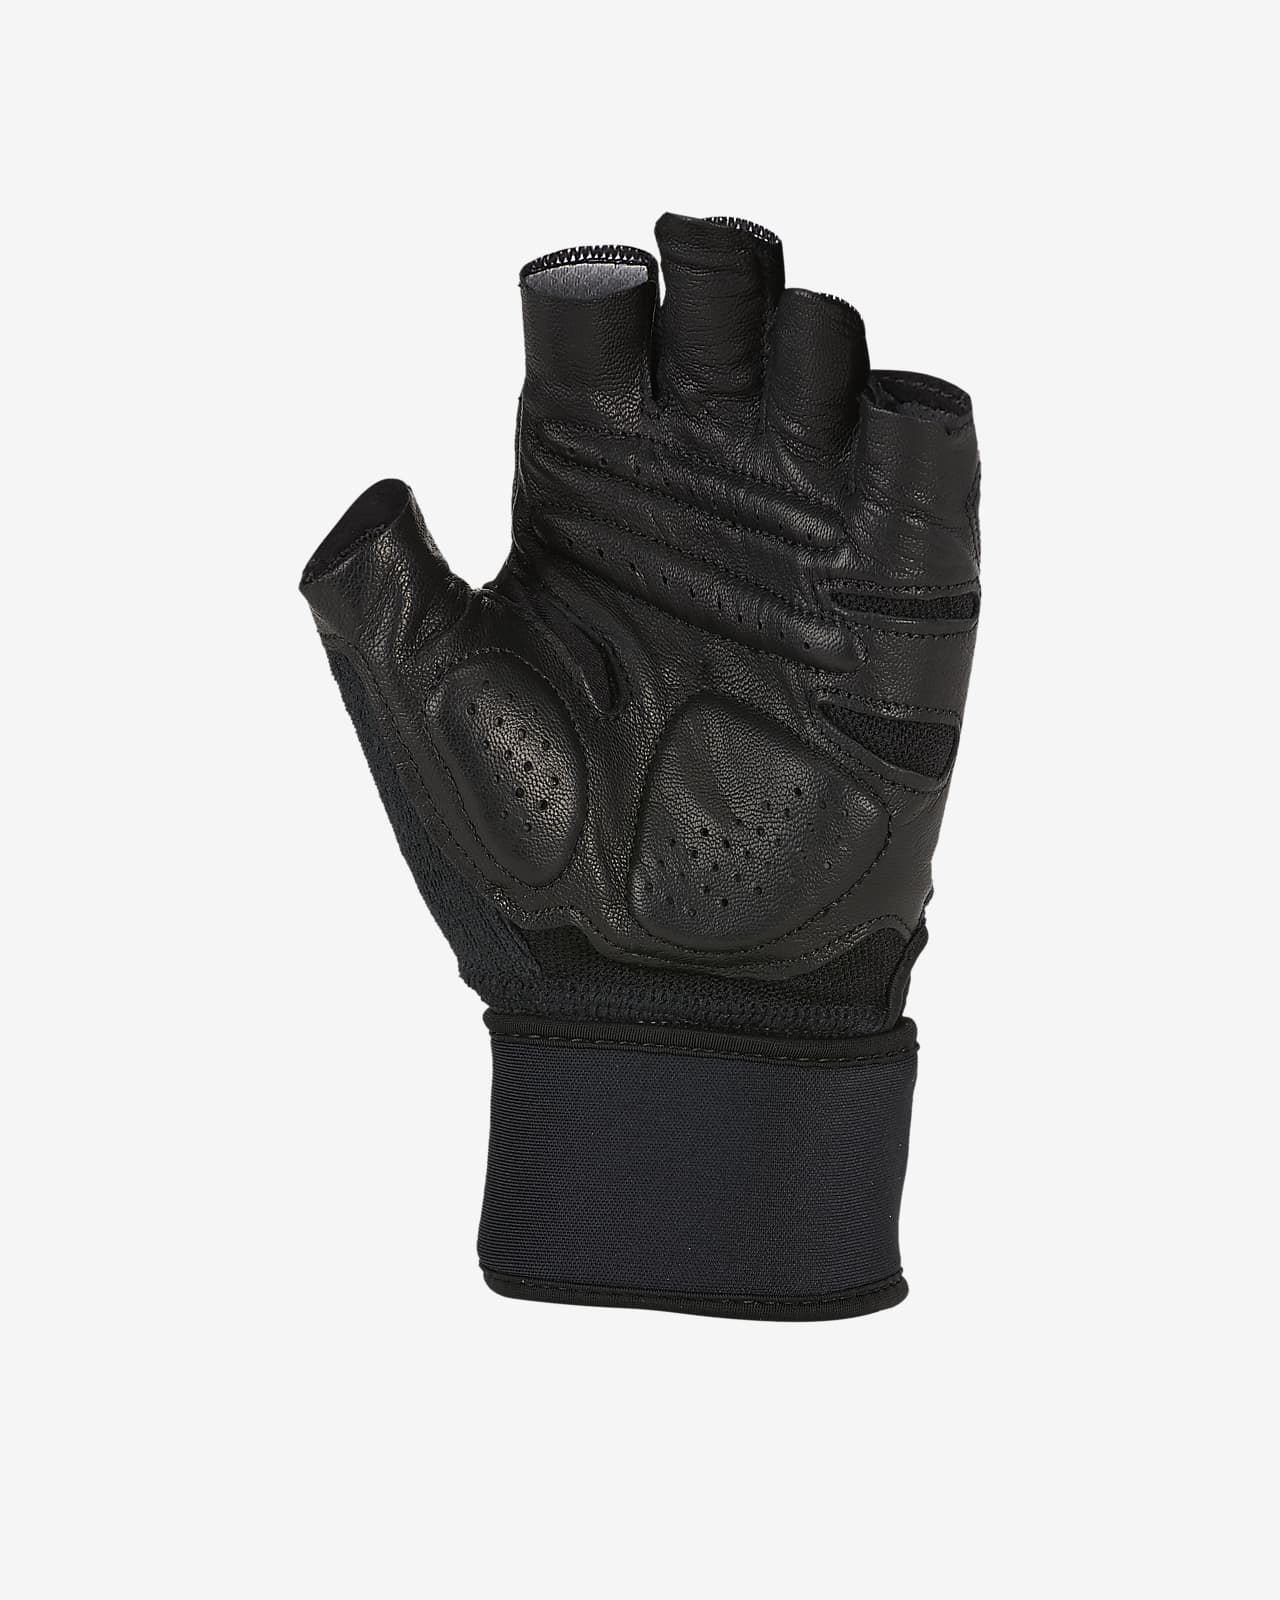 Elevated Men's Gloves. Nike GB